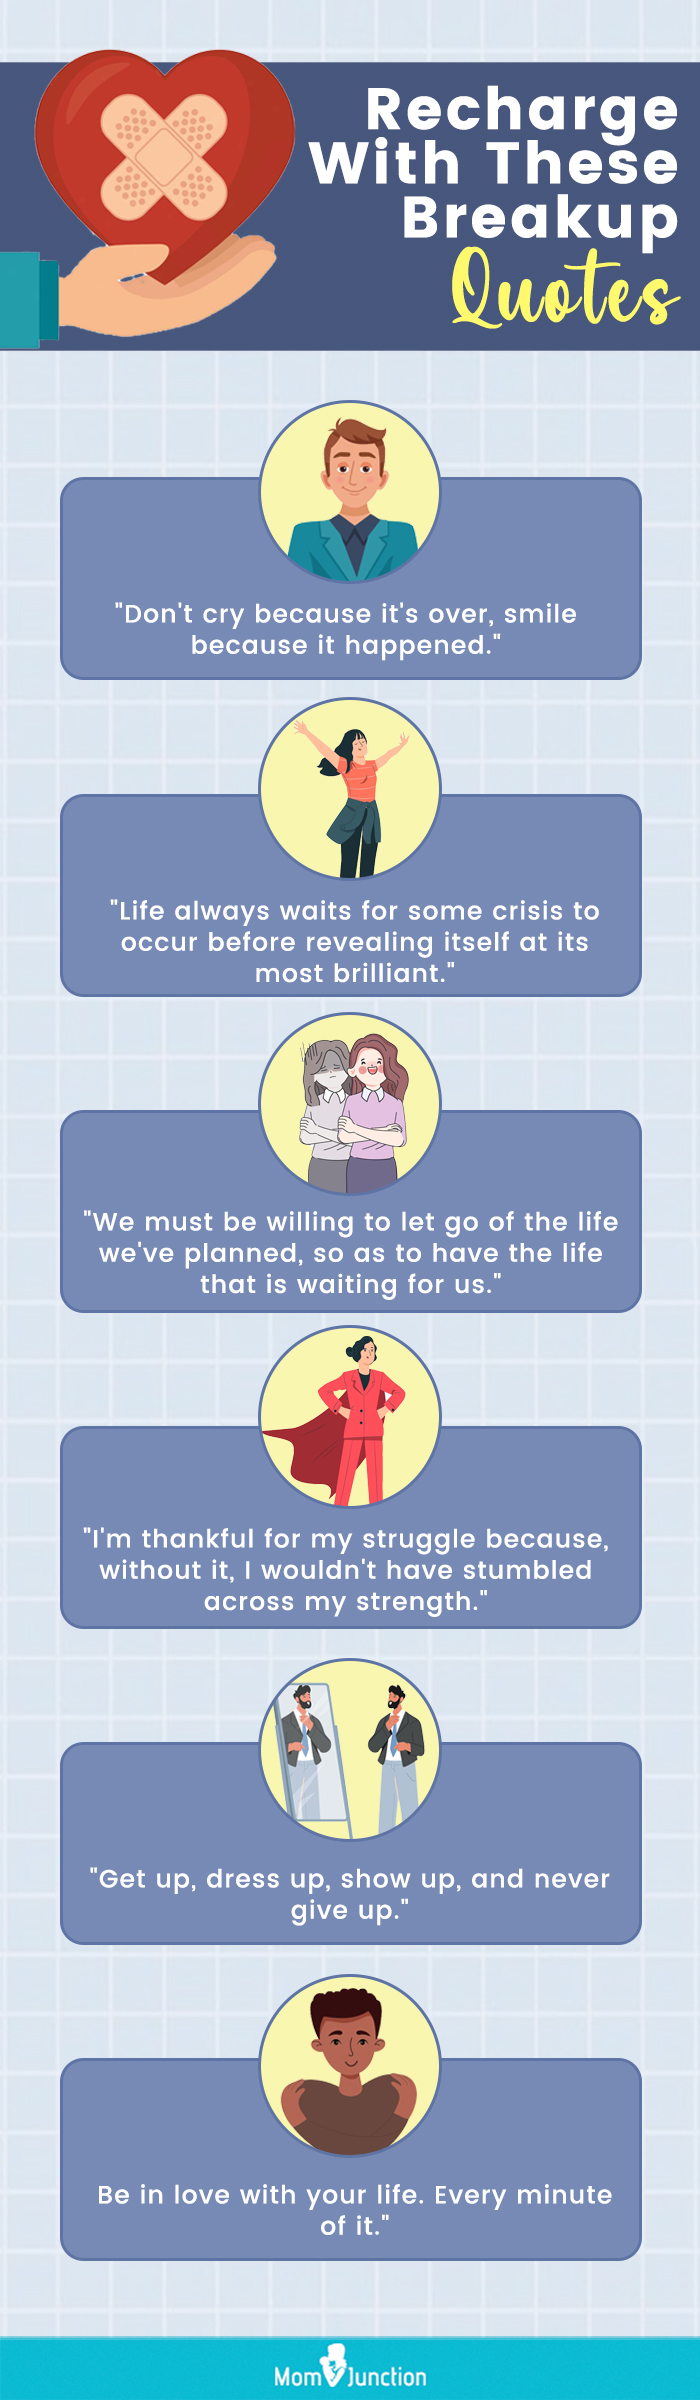 recharge with these breakup quotes (infographic)